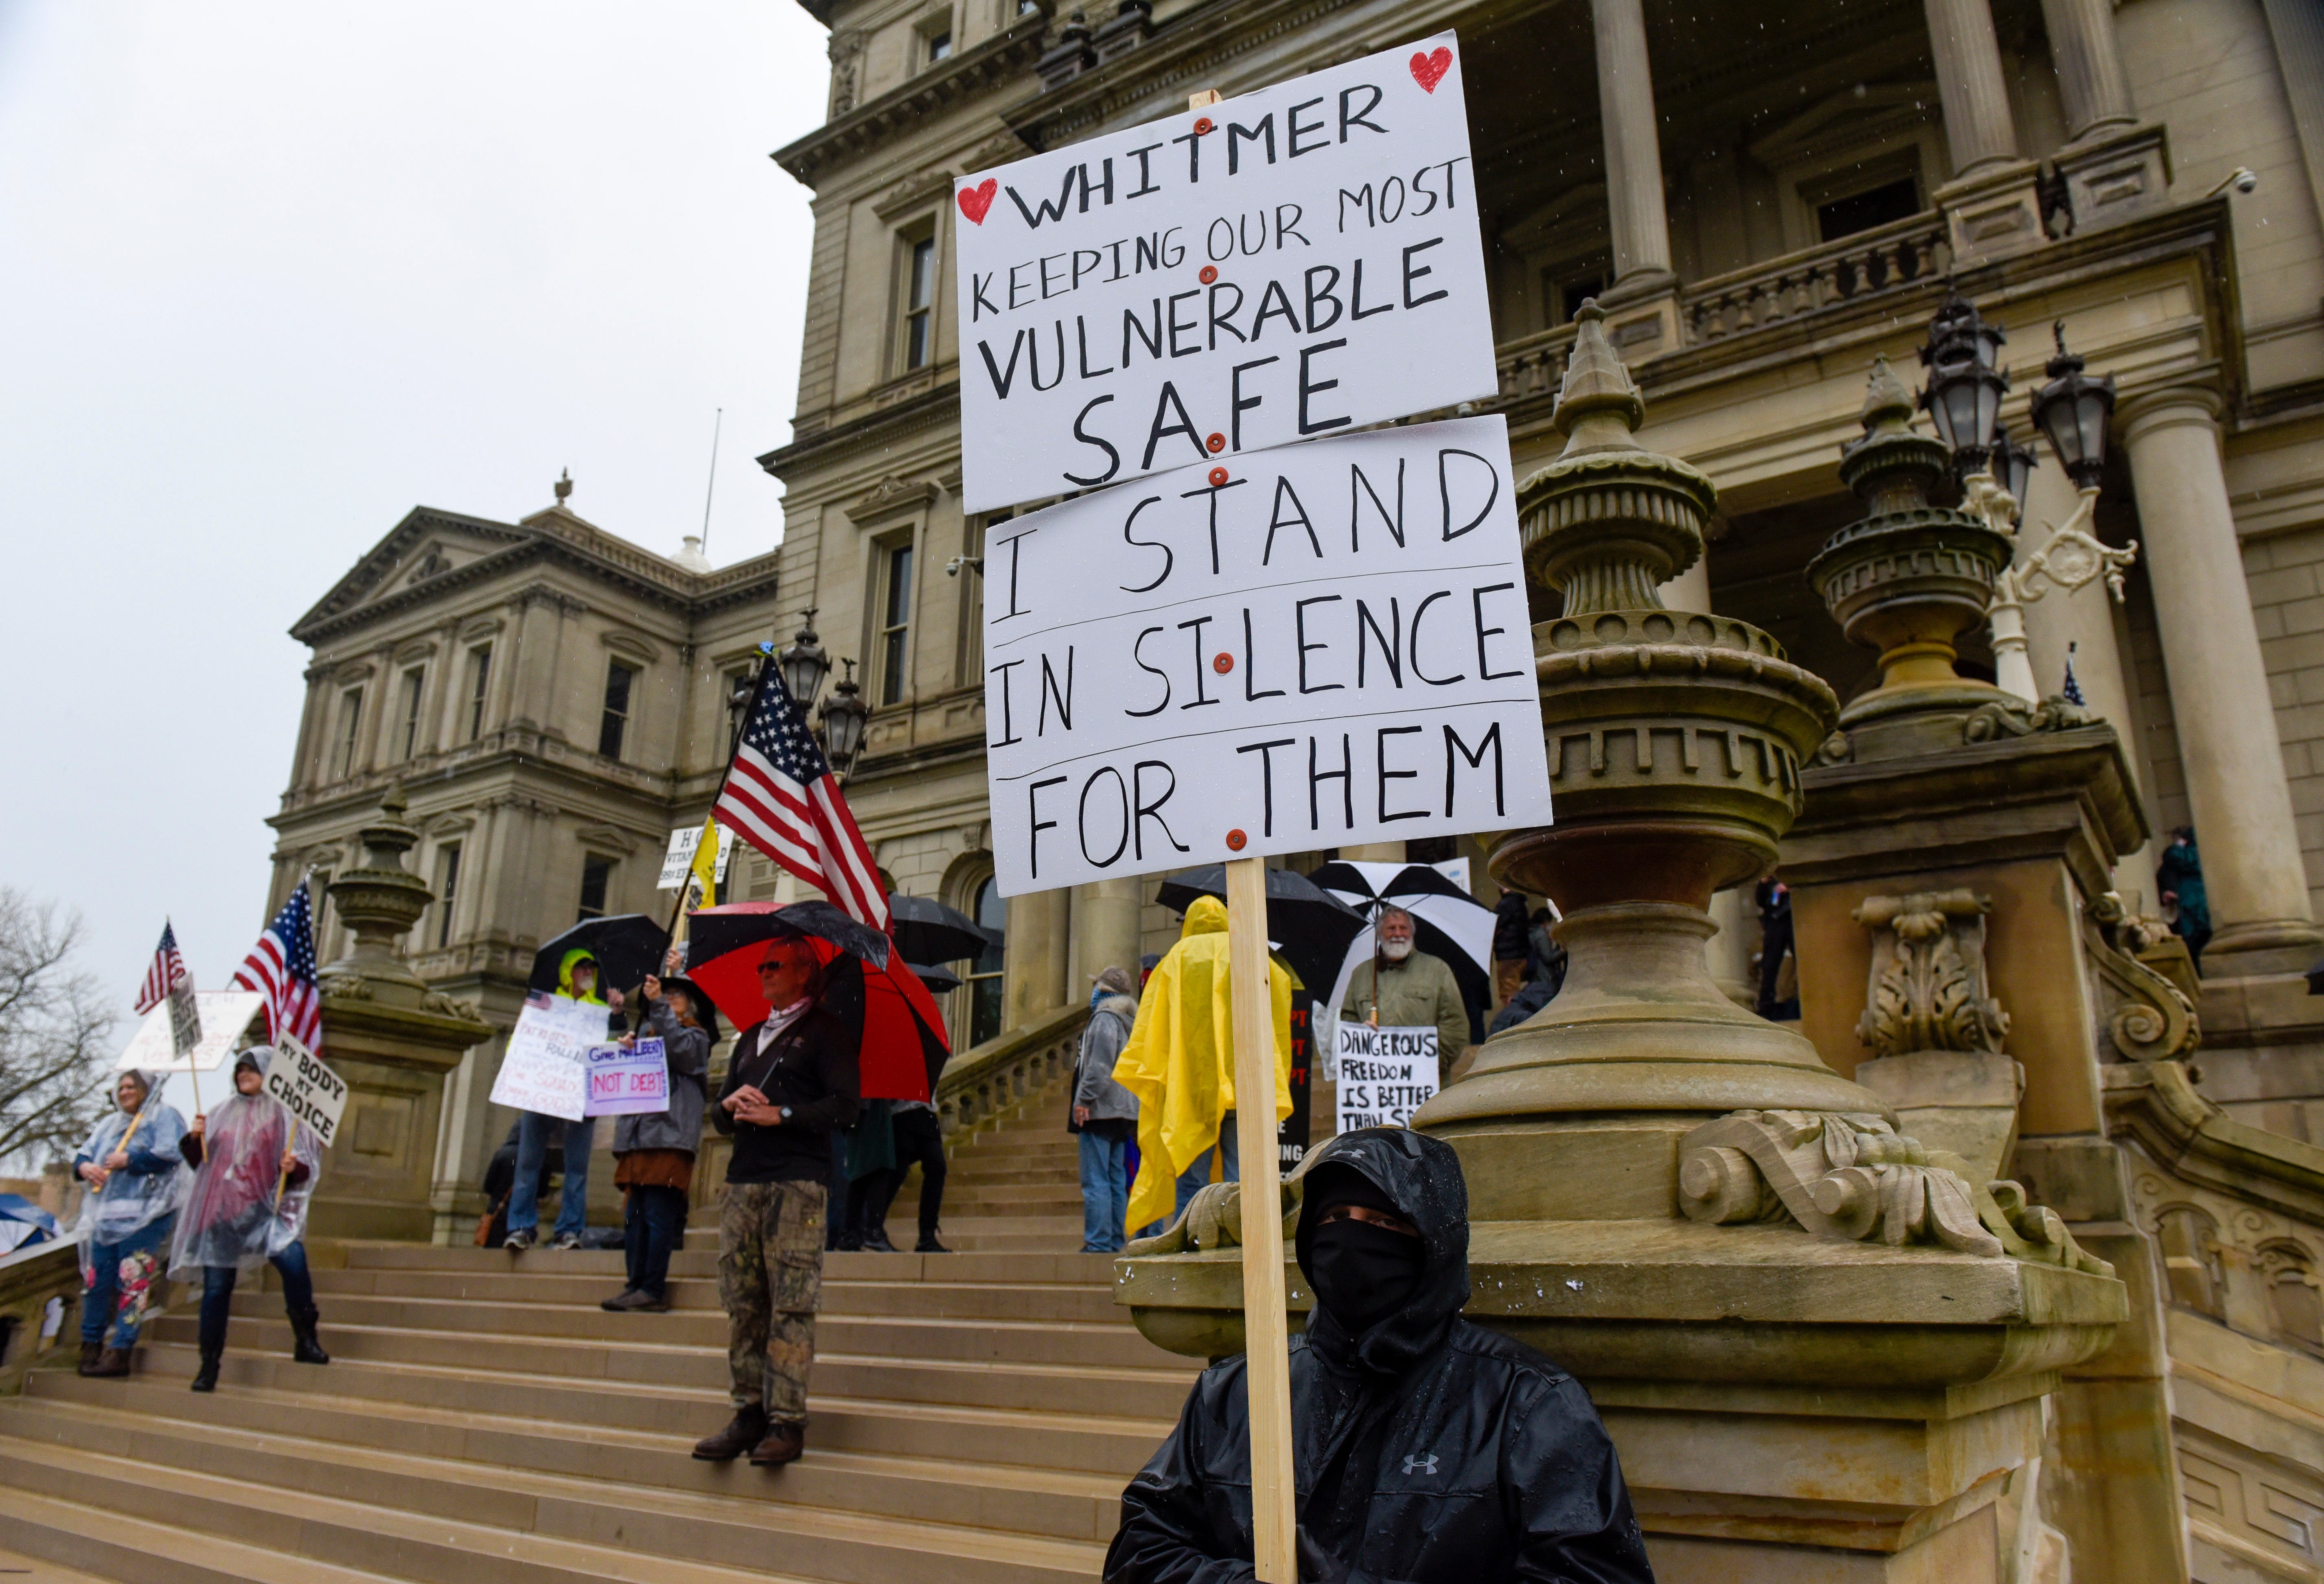 A counter protester stands for Michigan Governor Gretchen Whitmer during a protest at the state Capitol to oppose the executive orders in response to the coronavirus pandemic.